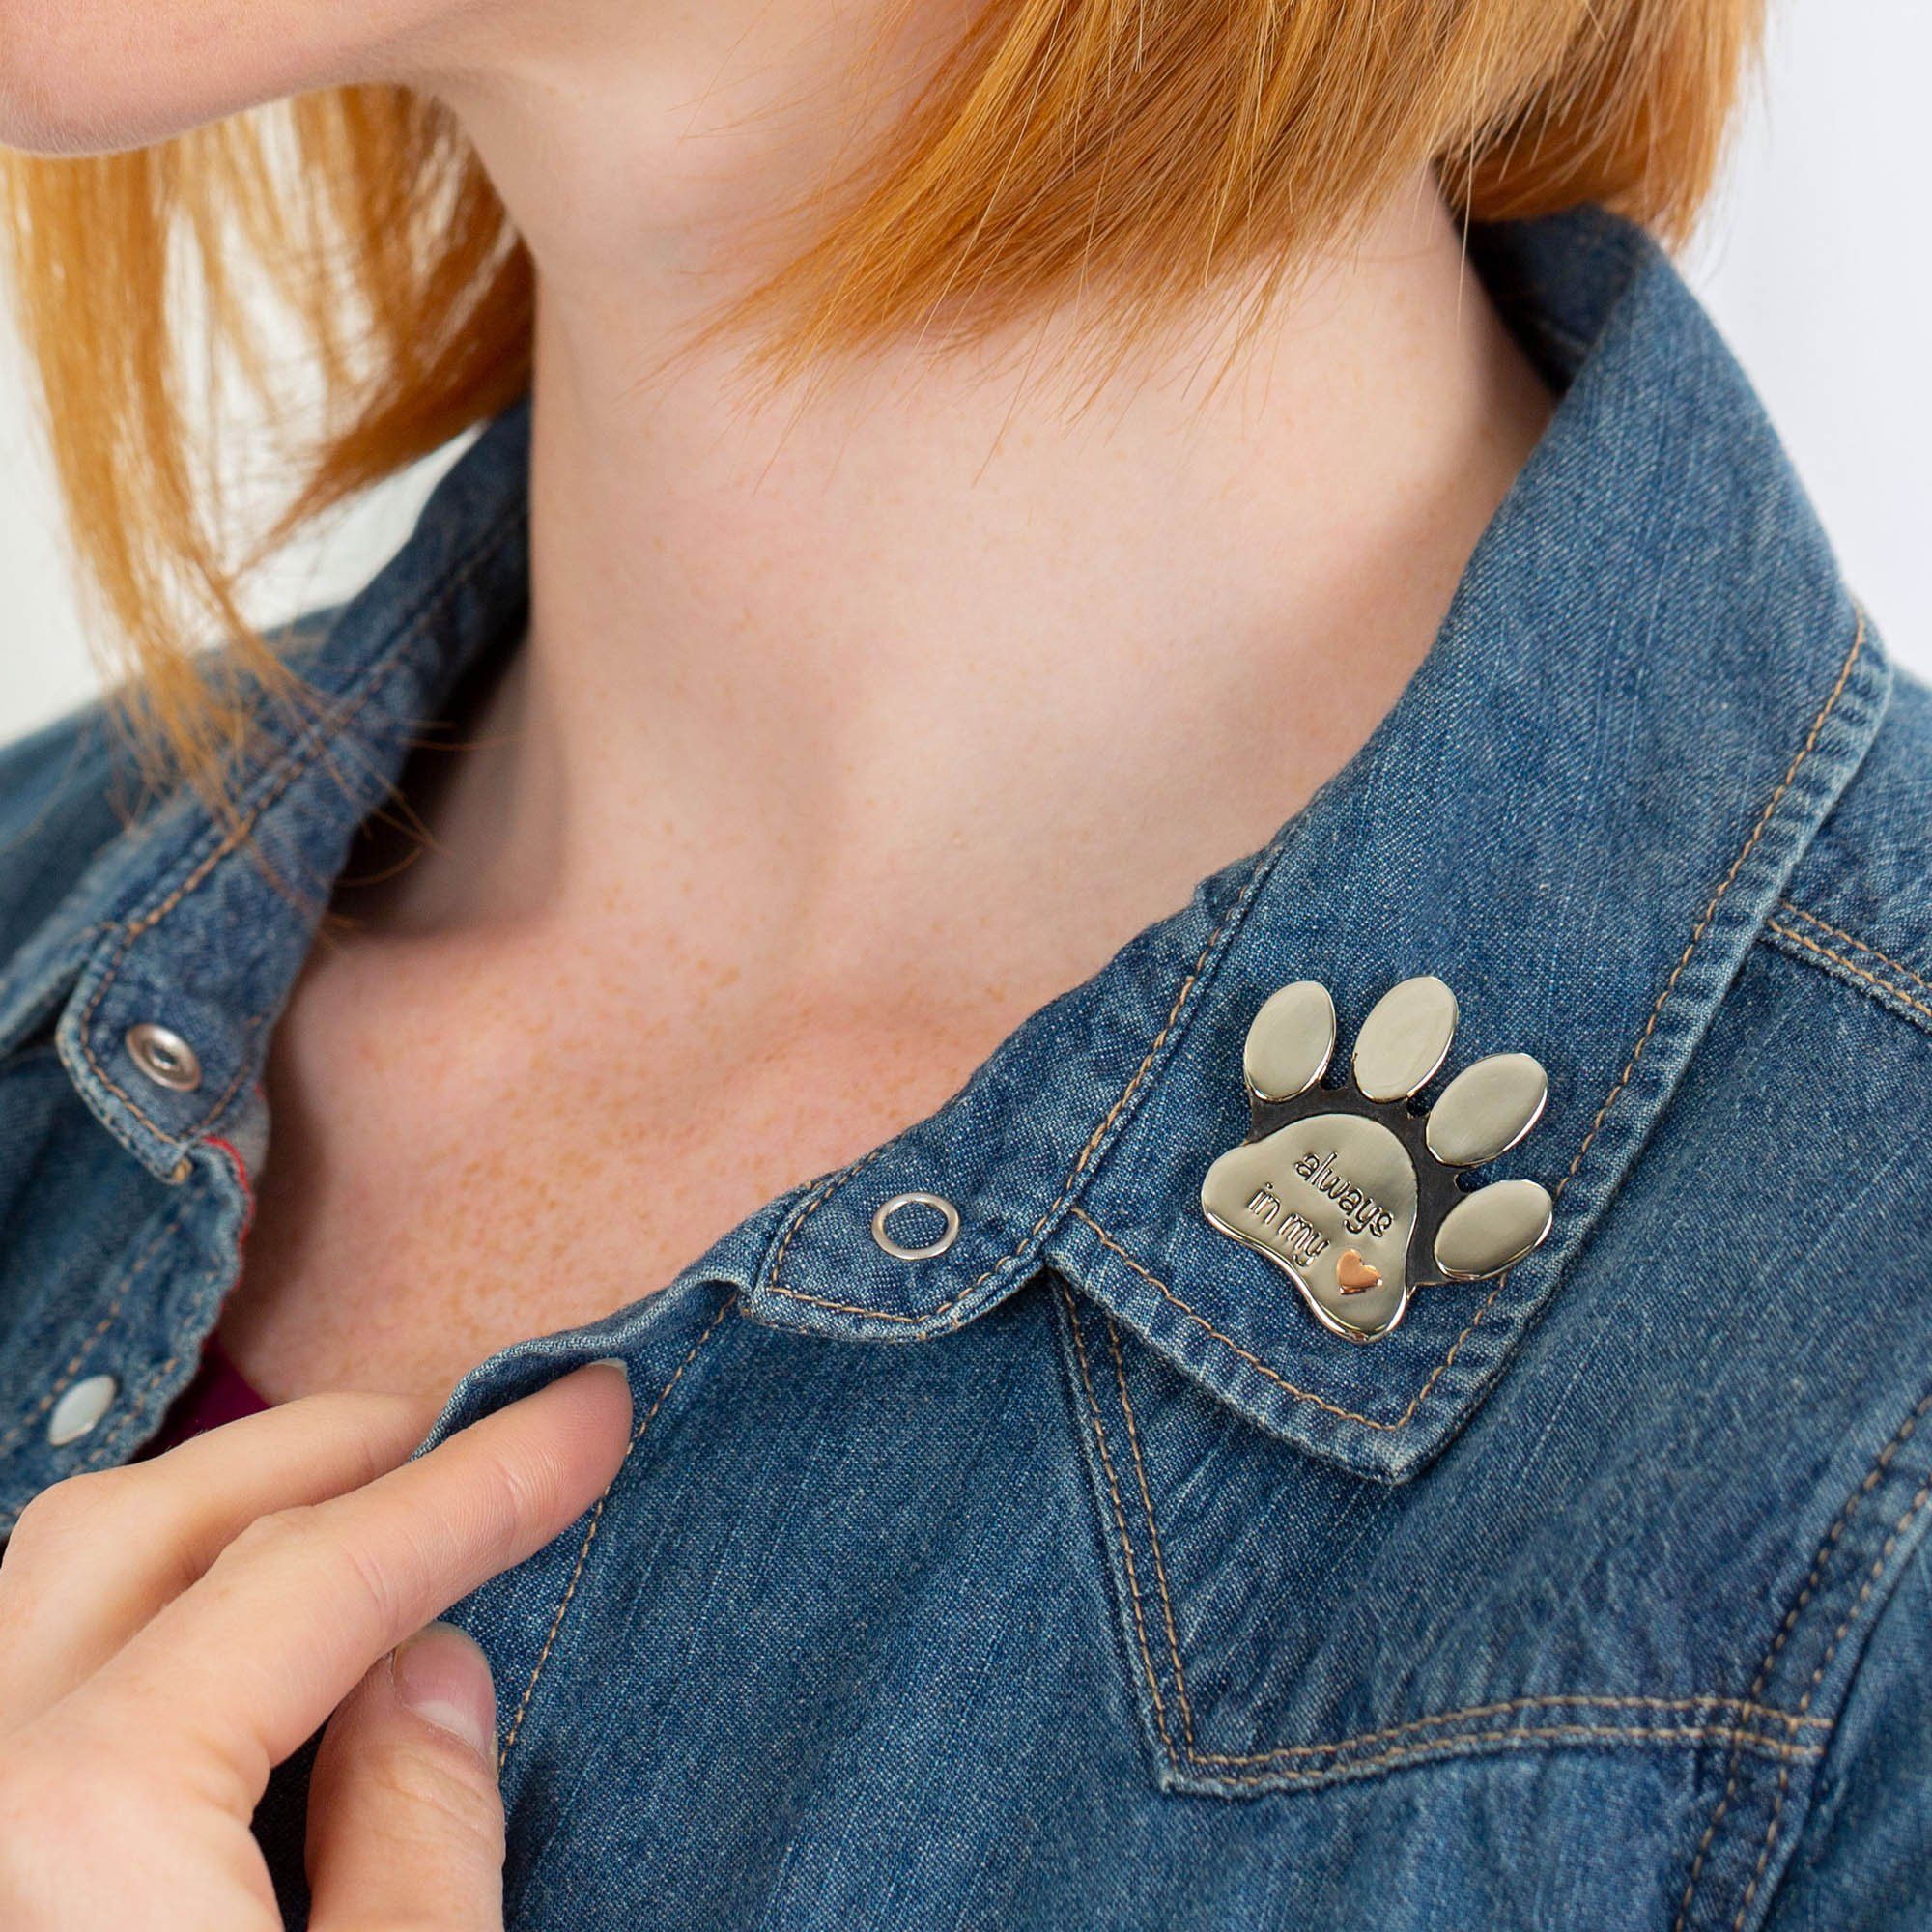 Remembrance Mixed Metals Paw Pin - Paw Prints On My Heart